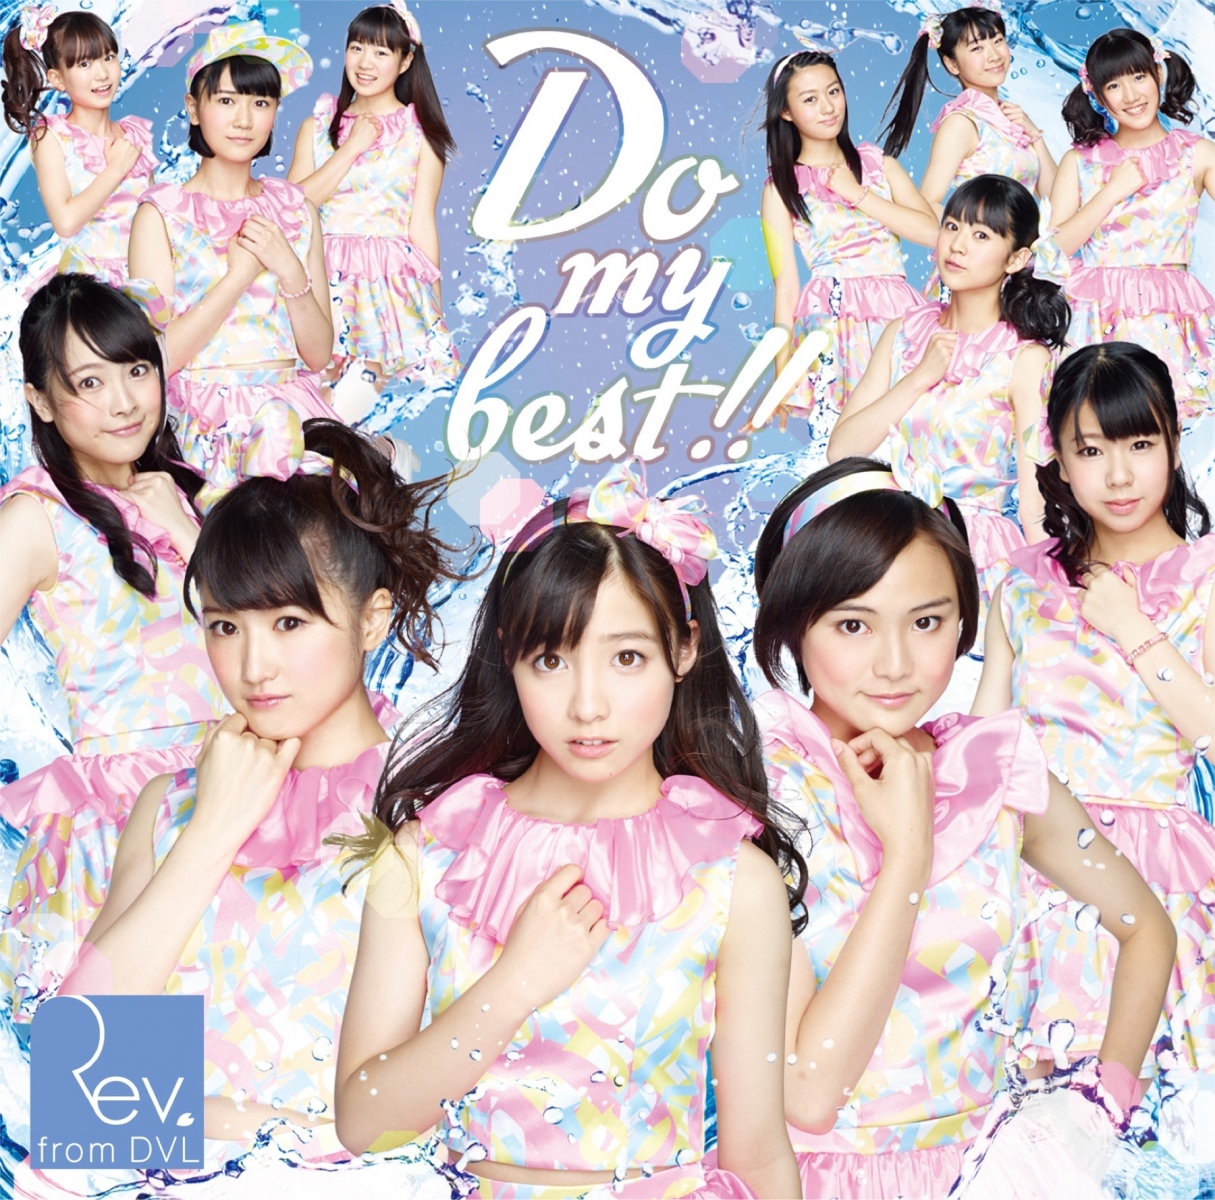 Rev.from DVL reveals TV drama like MV for their 2nd single “Do my best!!”